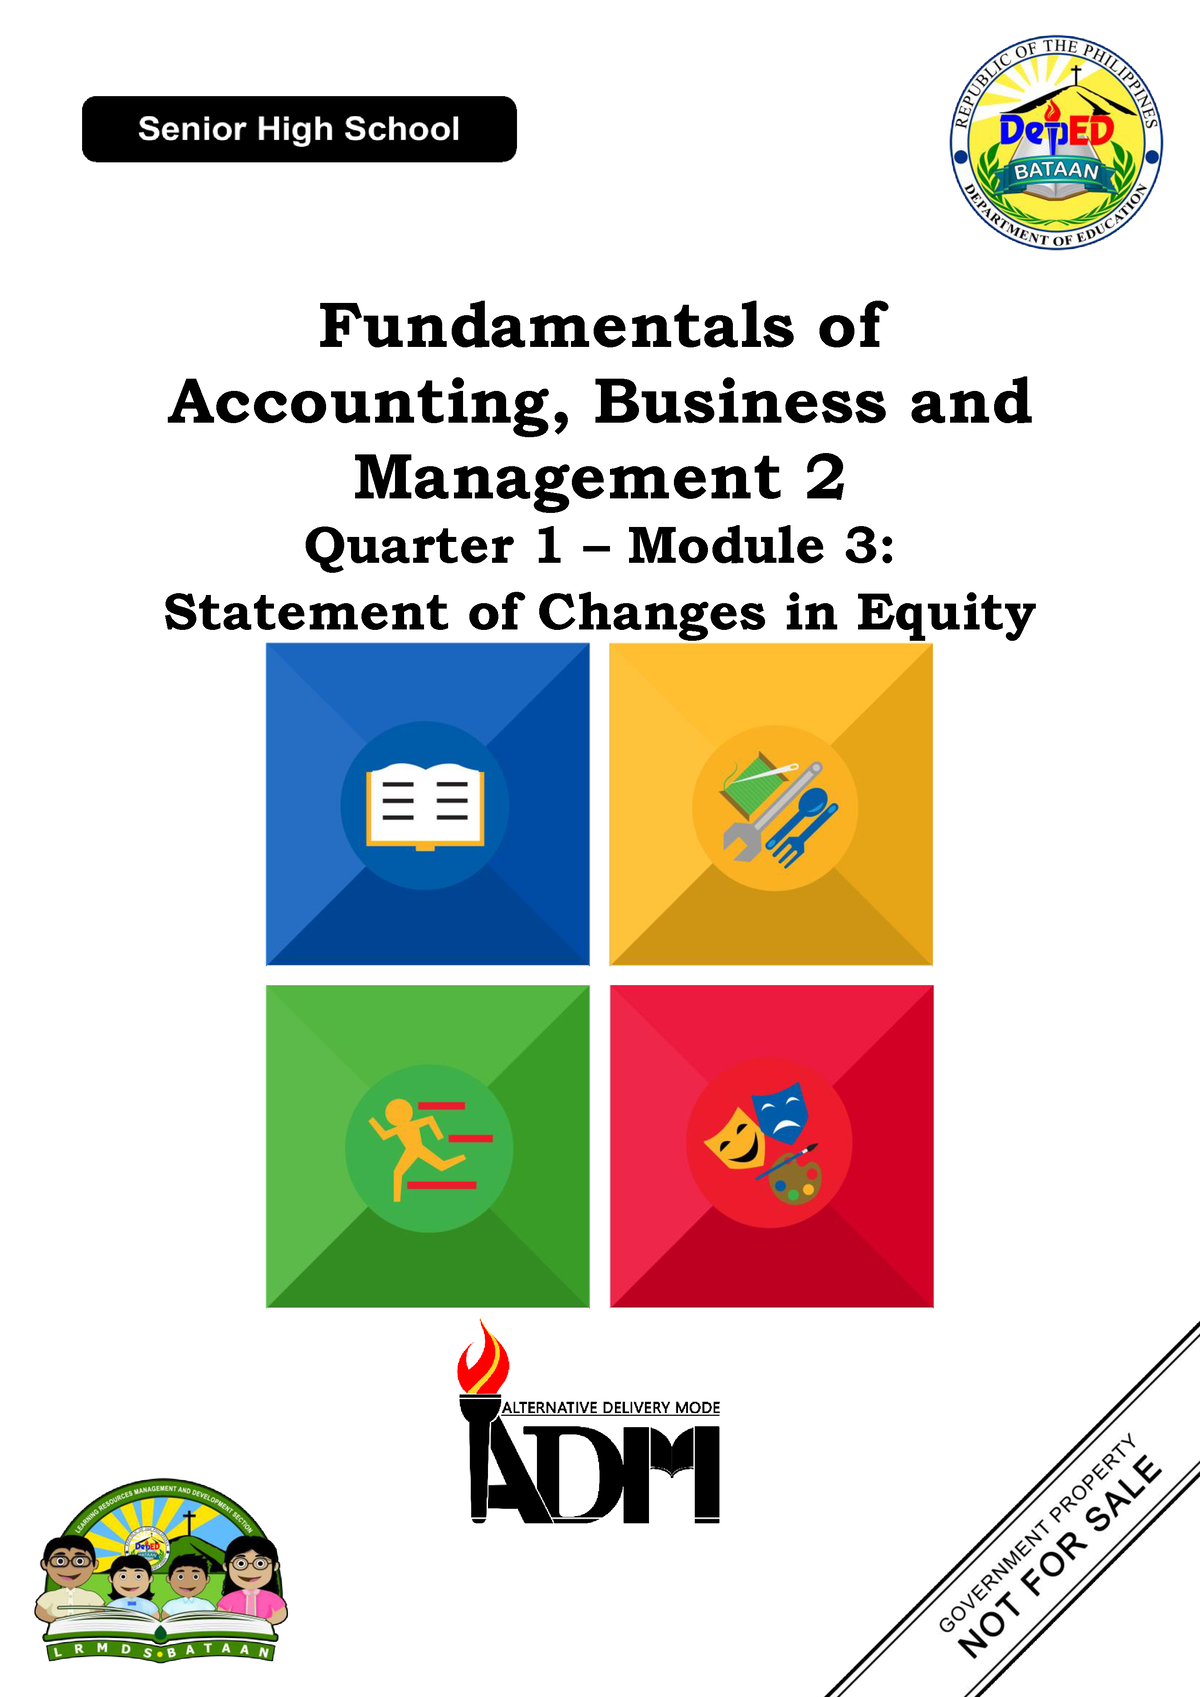 fabm2-q1-mod3-statement-of-changes-in-equity-v3-r-fundamentals-of